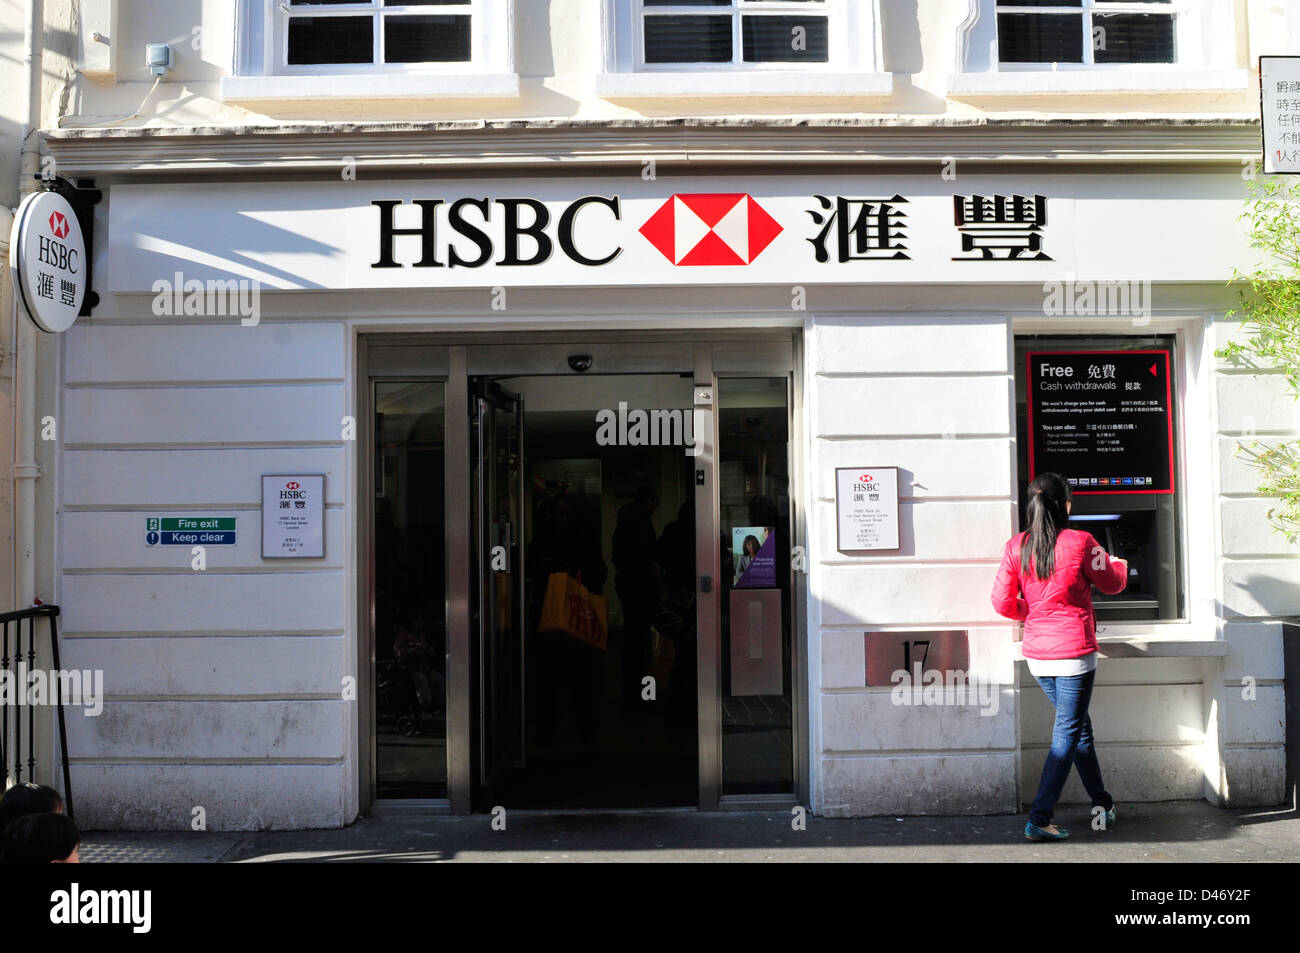 A young woman uses a cash mash at an HSBC branch in China Town, central London, UK. Stock Photo